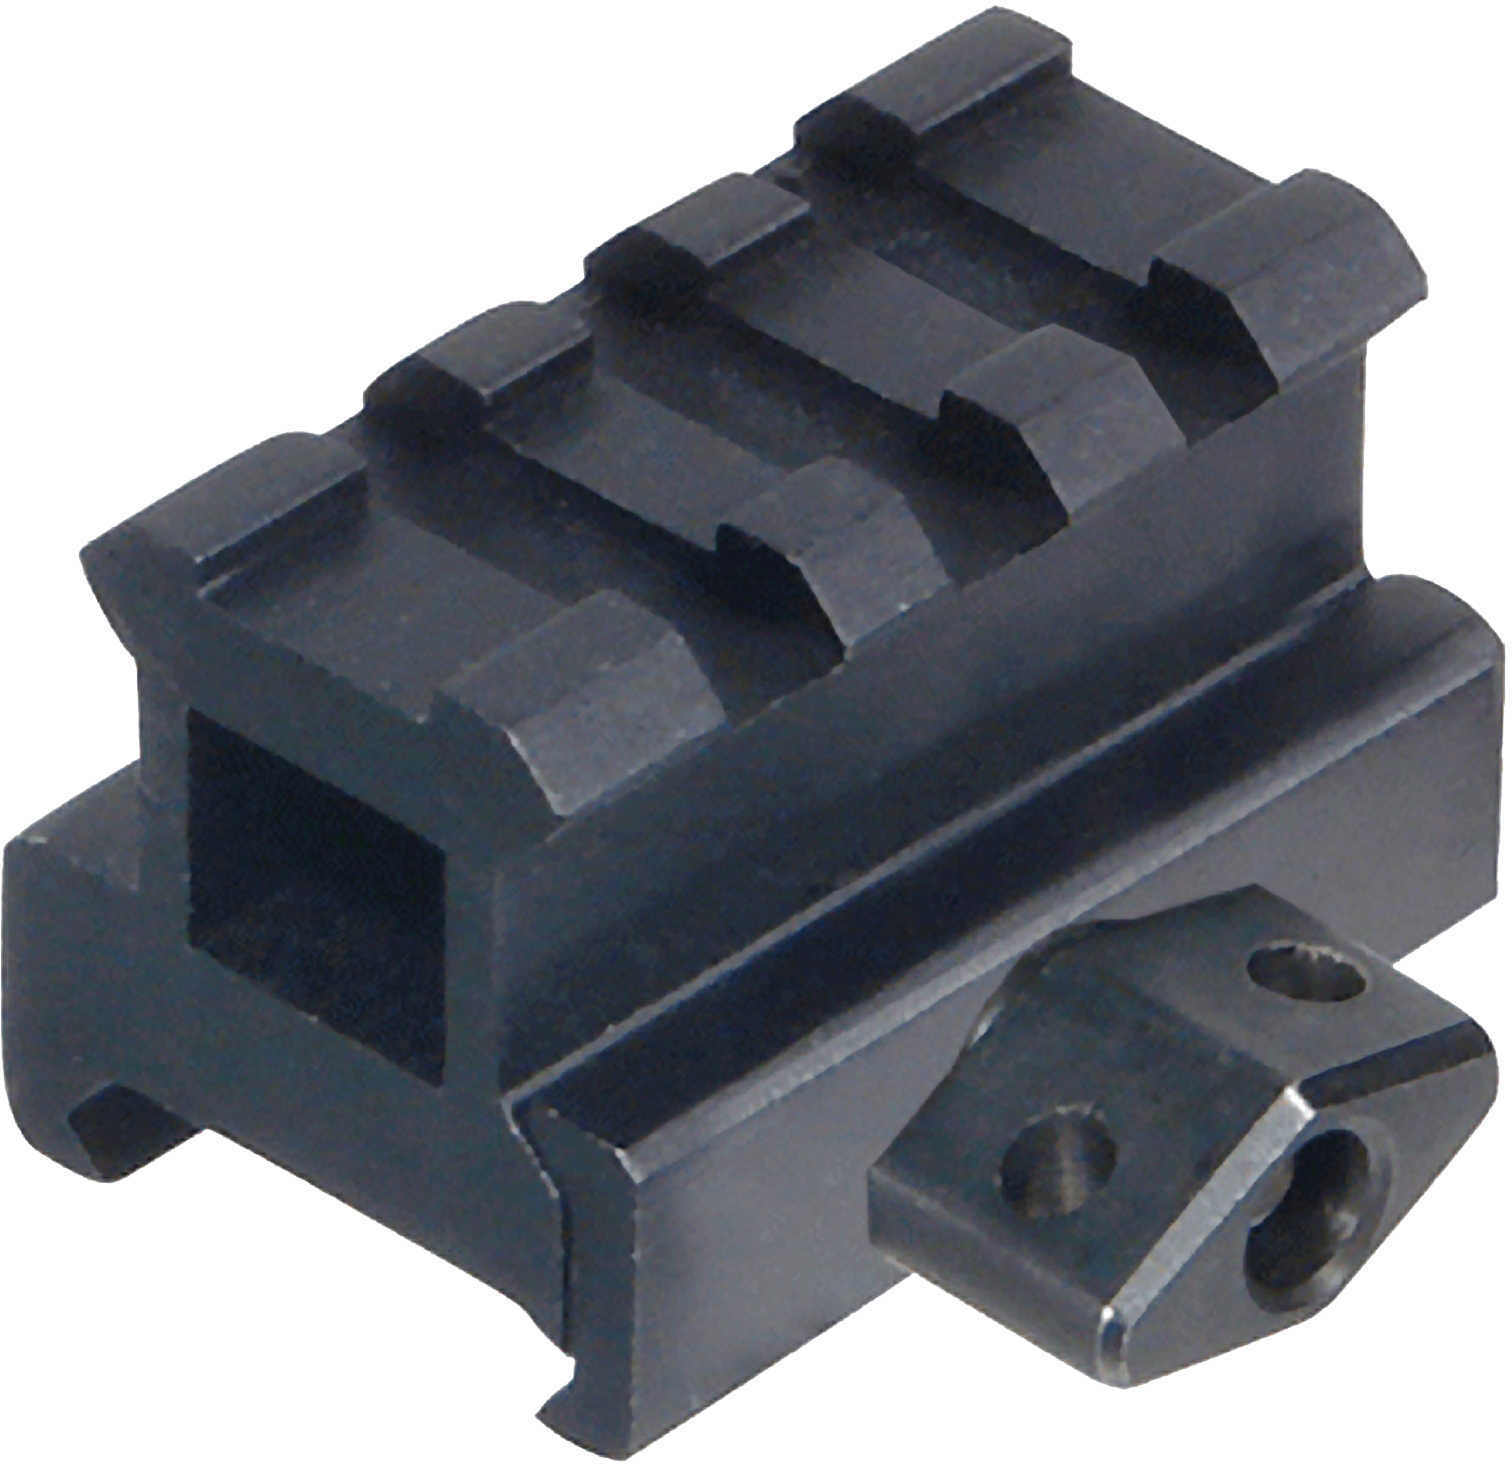 Leapers UTG Med-Pro Compact Riser Mount 0.83" High 3 Slots